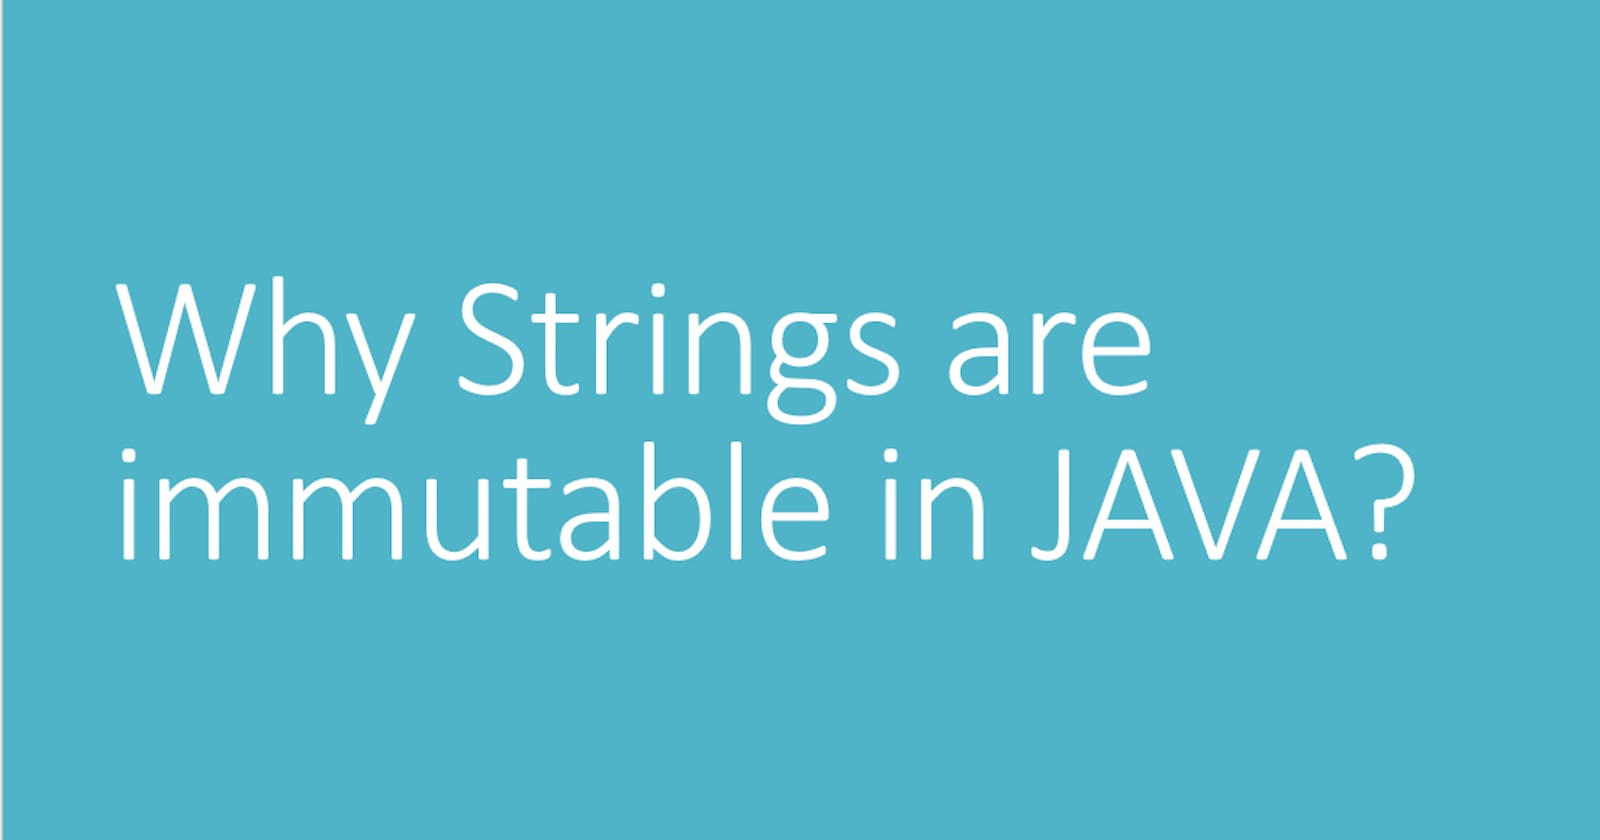 Why Strings are immutable in Java?